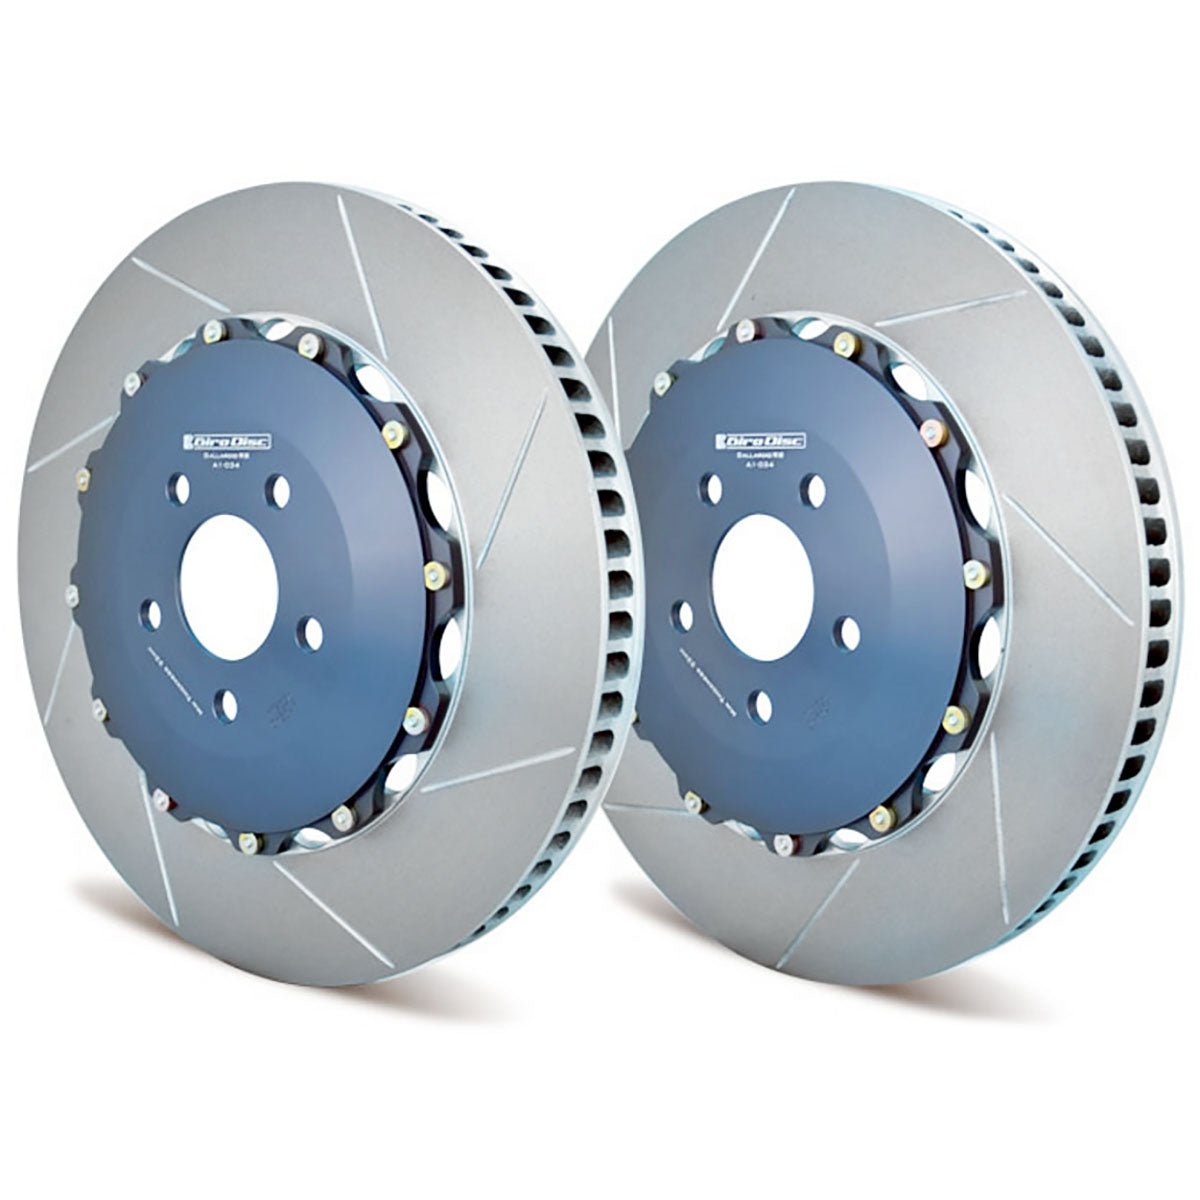 A1-034 Girodisc 2pc Front Brake Rotors (Audi S4/S5 2009-16) - Competition Motorsport